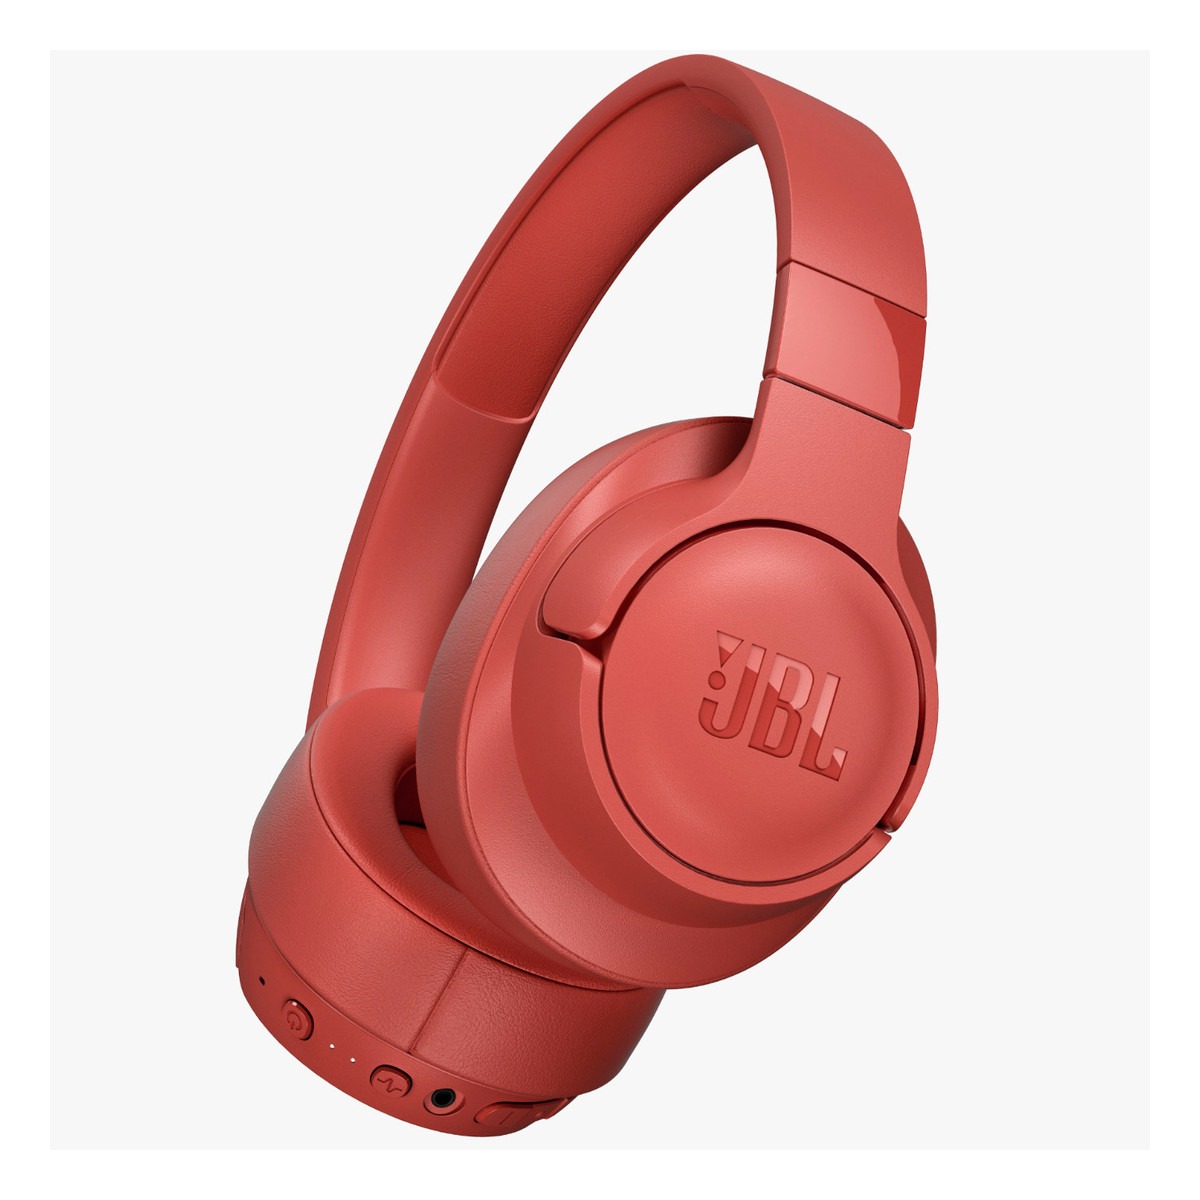 JBL Wireless Over-Ear Headphones with Noise Cancellation, Red - TT750BTNCWHT